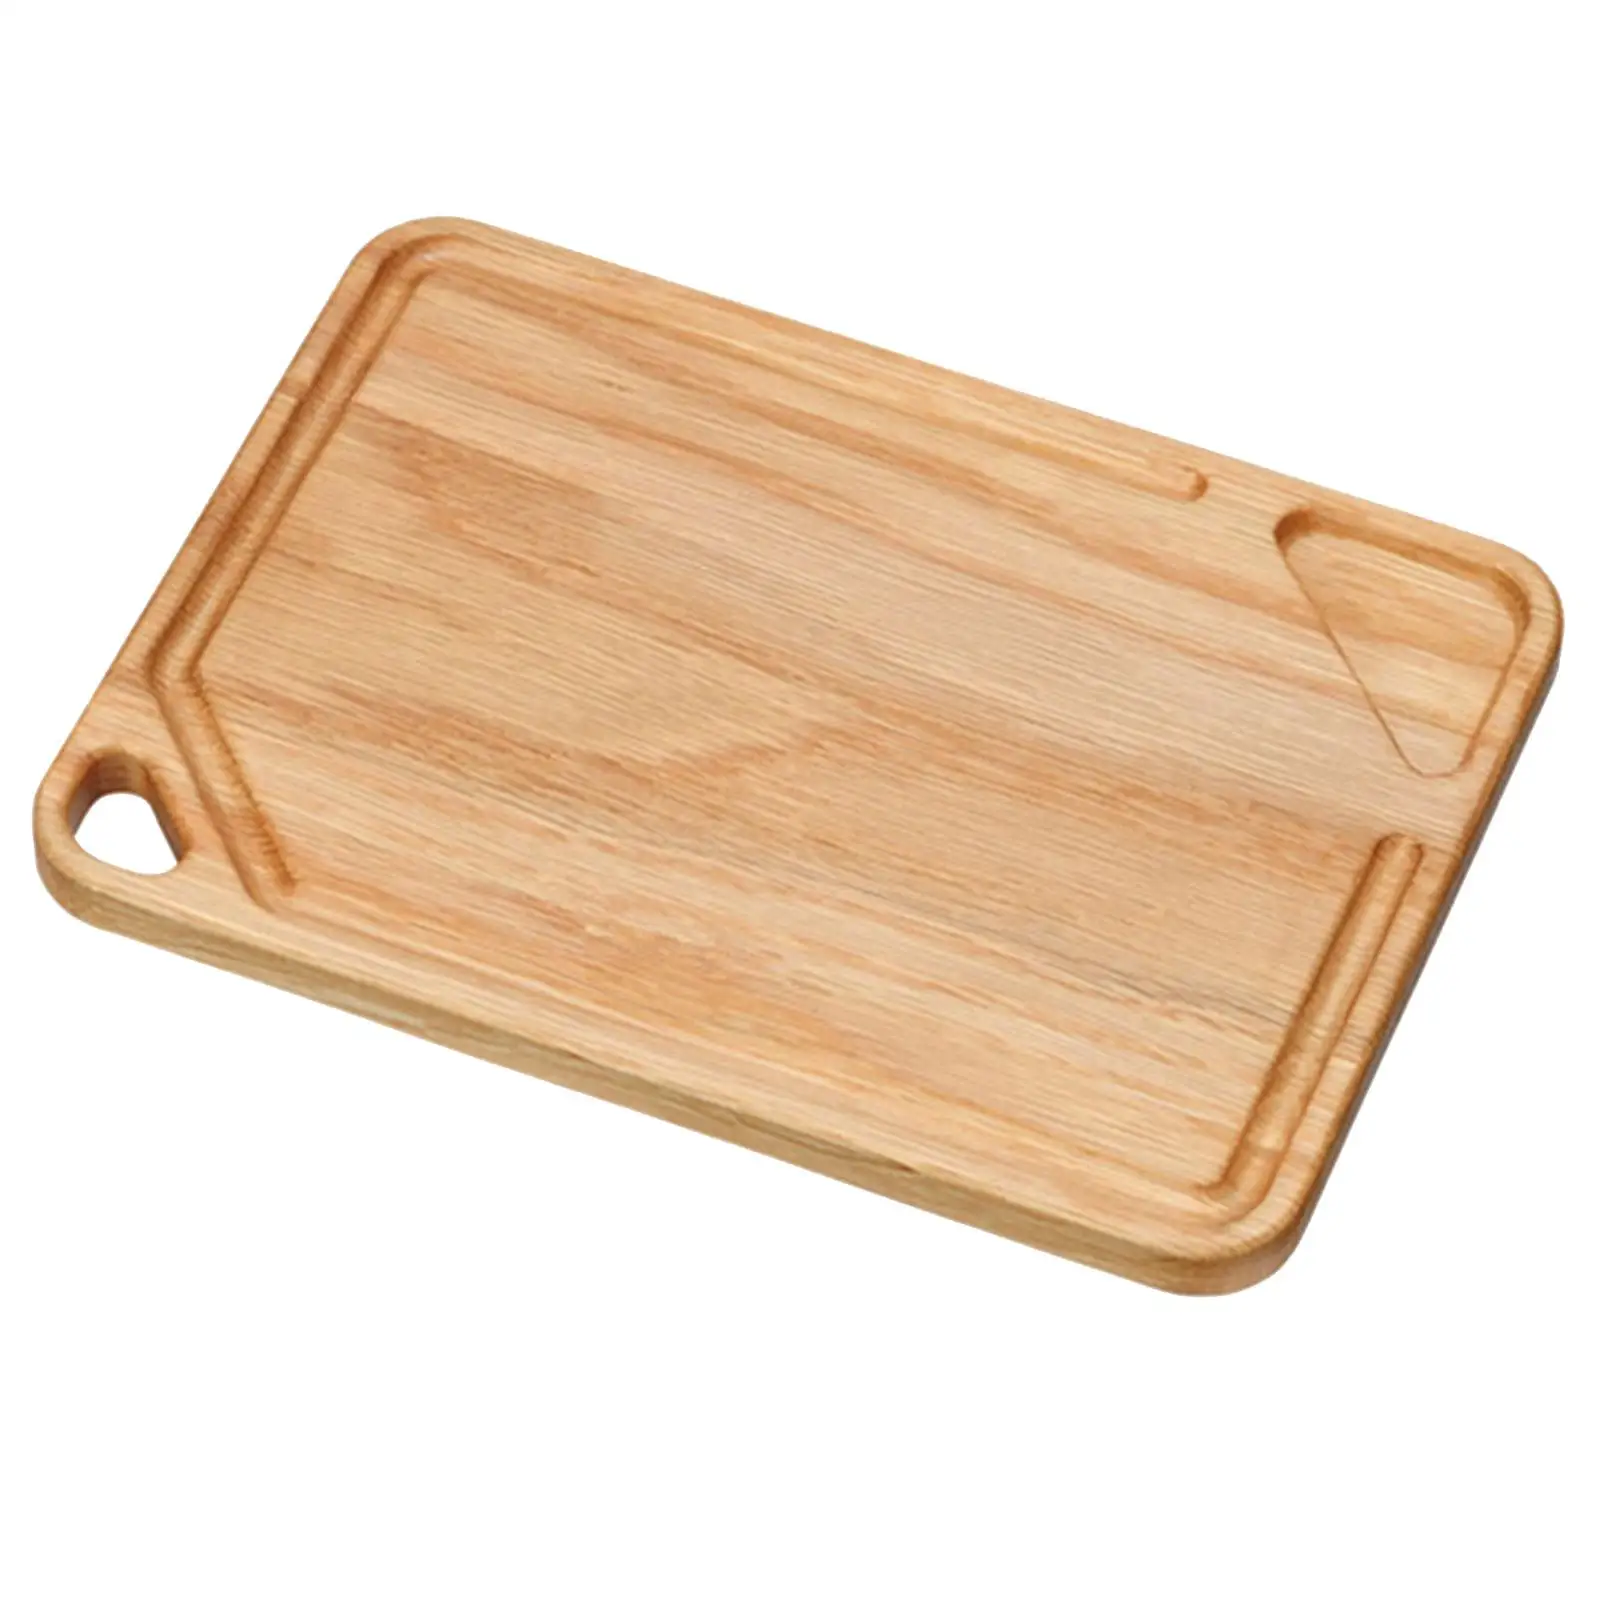 Wooden Cutting Board Kitchen Baking Utensils Chopping Blocks Pizza Tray Bread Tray Multipurpose Food Tray for Fruits Vegetables